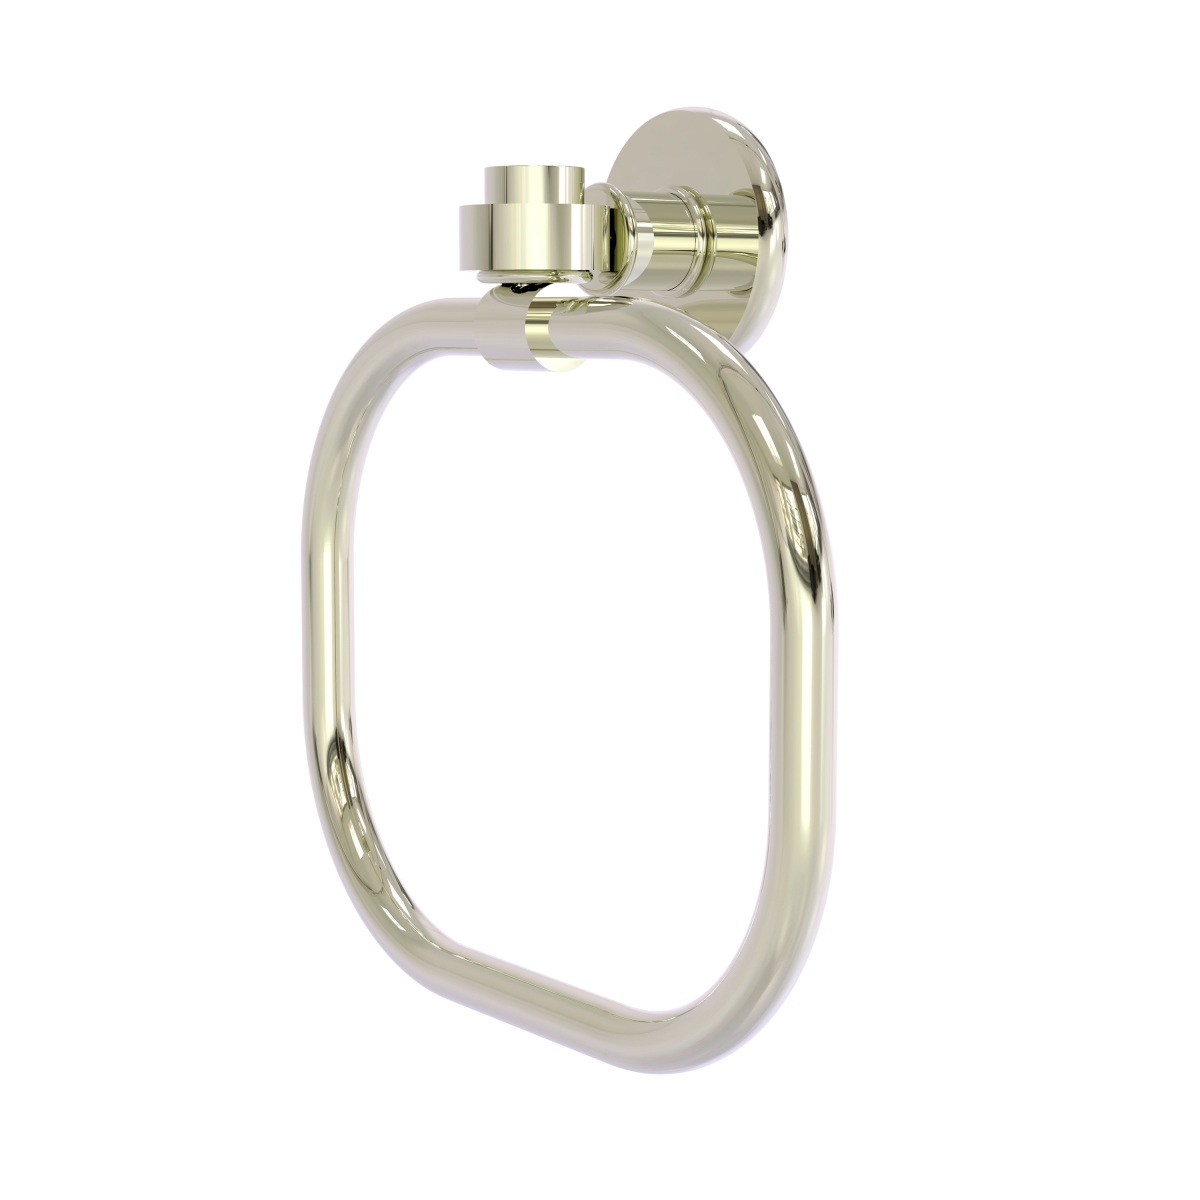 Picture of Allied Brass 2016-PNI Continental Collection Towel Ring, Polished Nickel